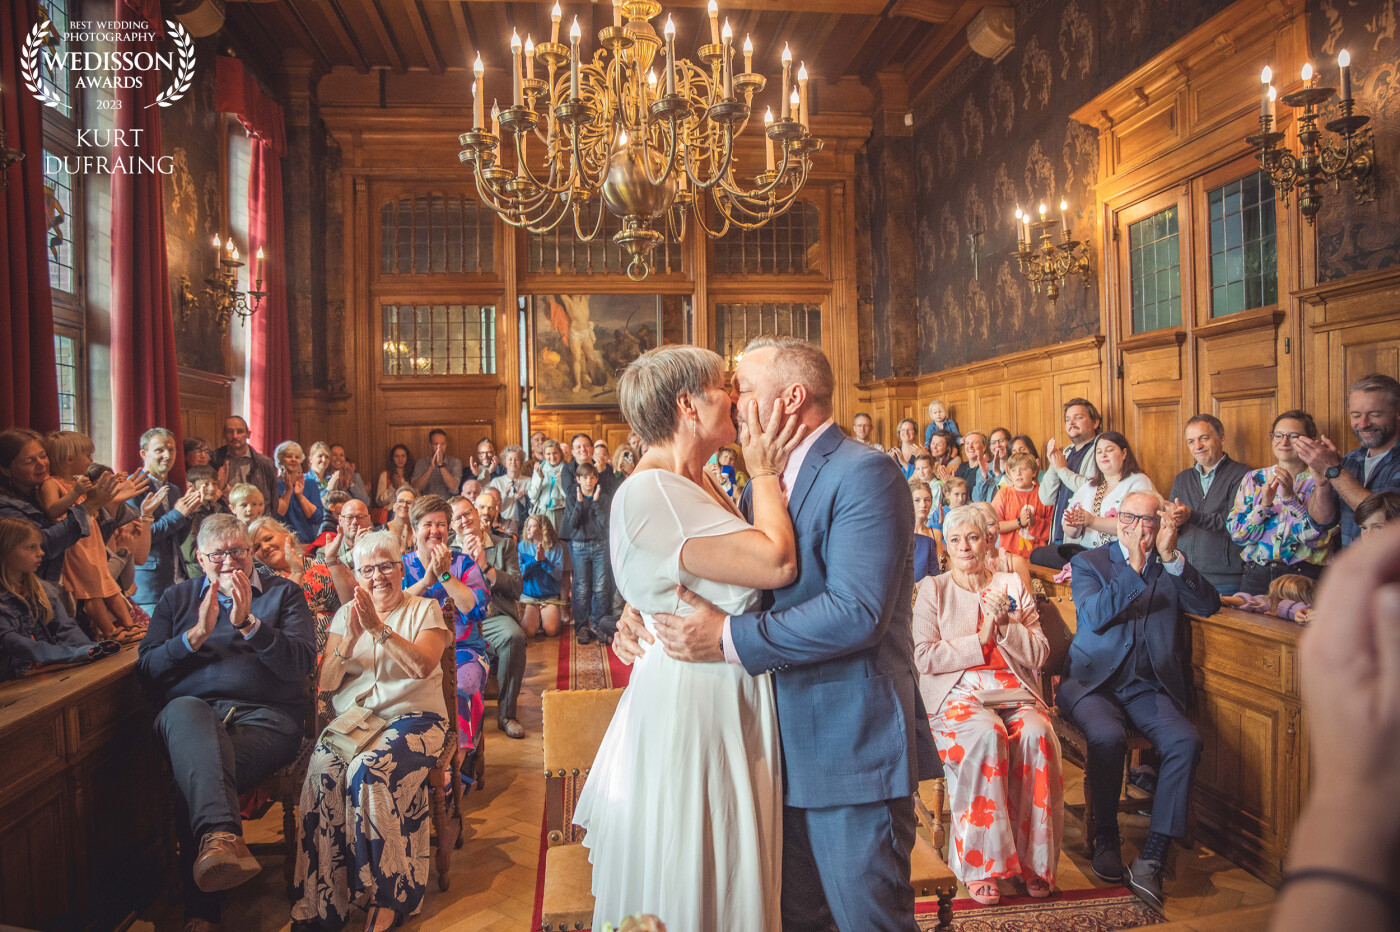 A special wedding report of a beautiful couple who have been our best friends for years. It gives some extra tension, but certainly also extra spontaneity. The ceremony room was packed with guests and gave a wonderfully warm group feeling.